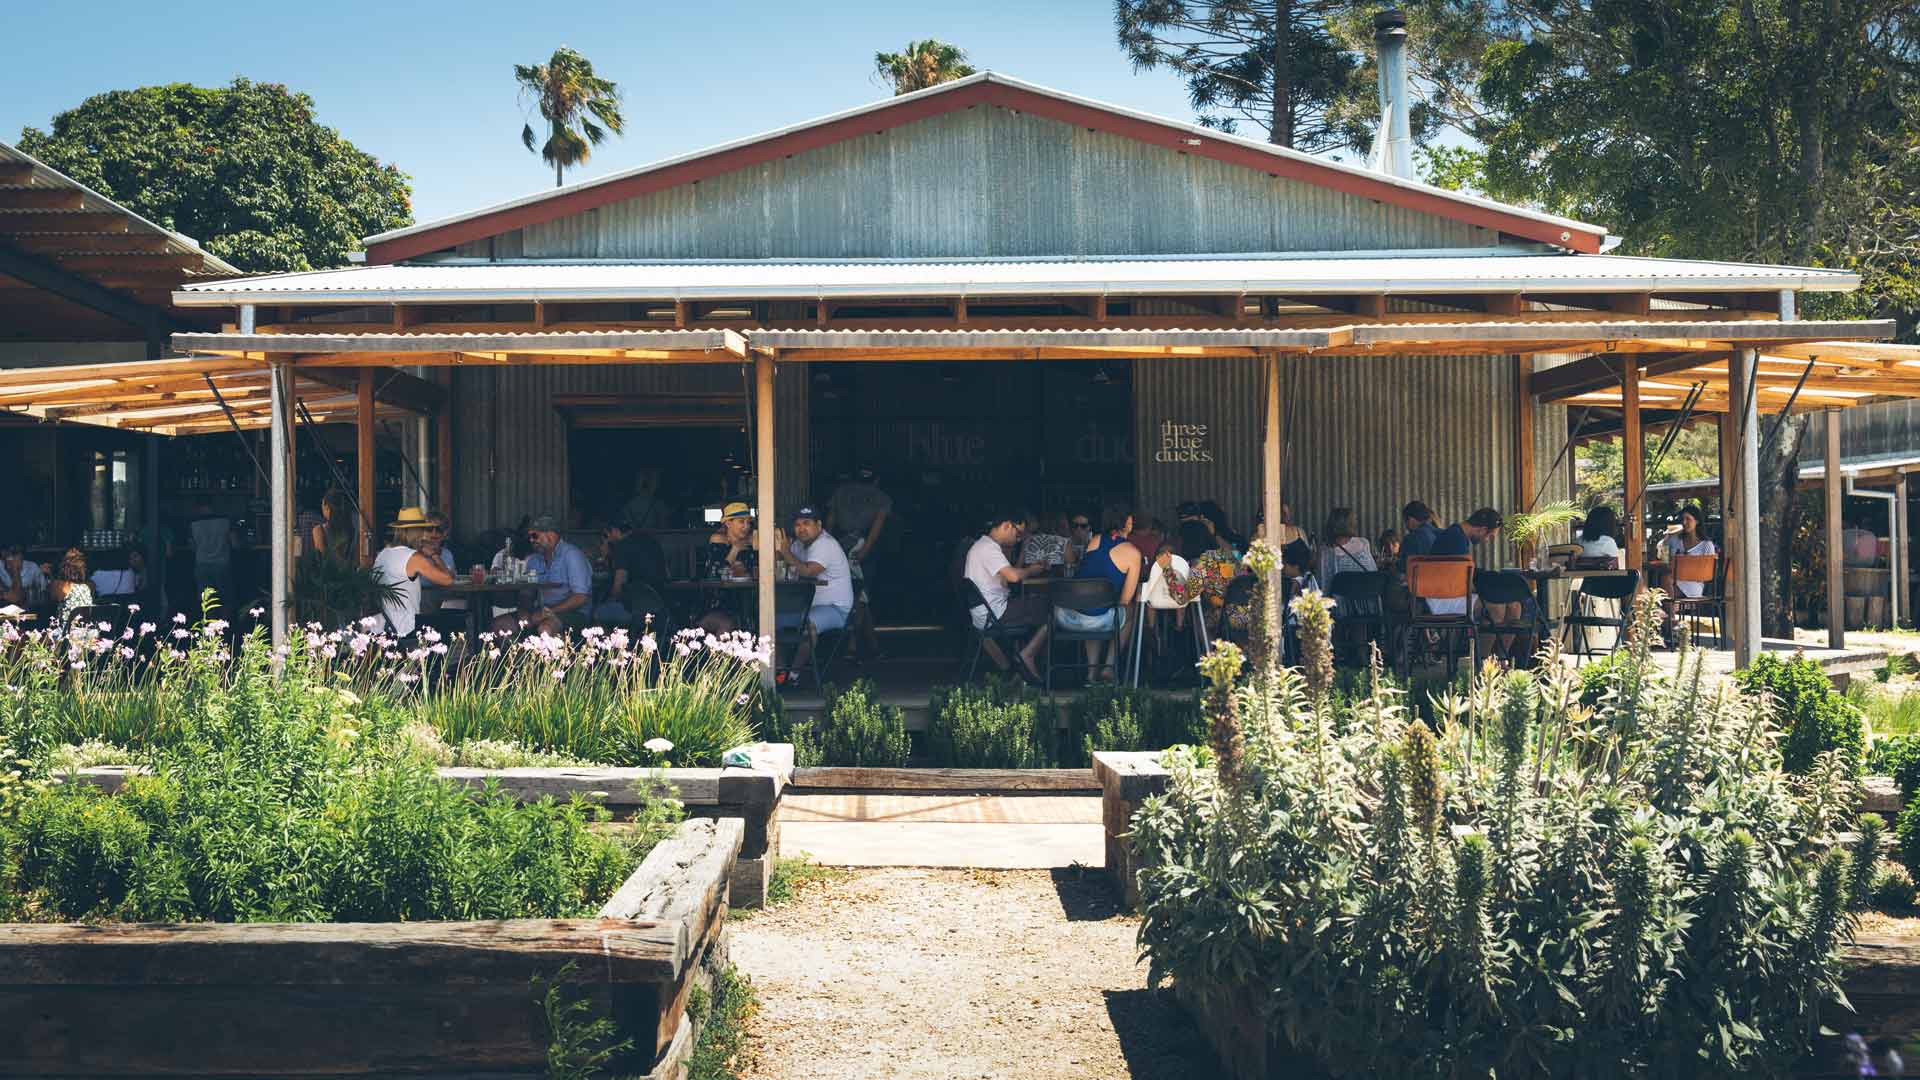 The Three Blue Ducks Team Is Opening a Restaurant in the Snowy Mountains